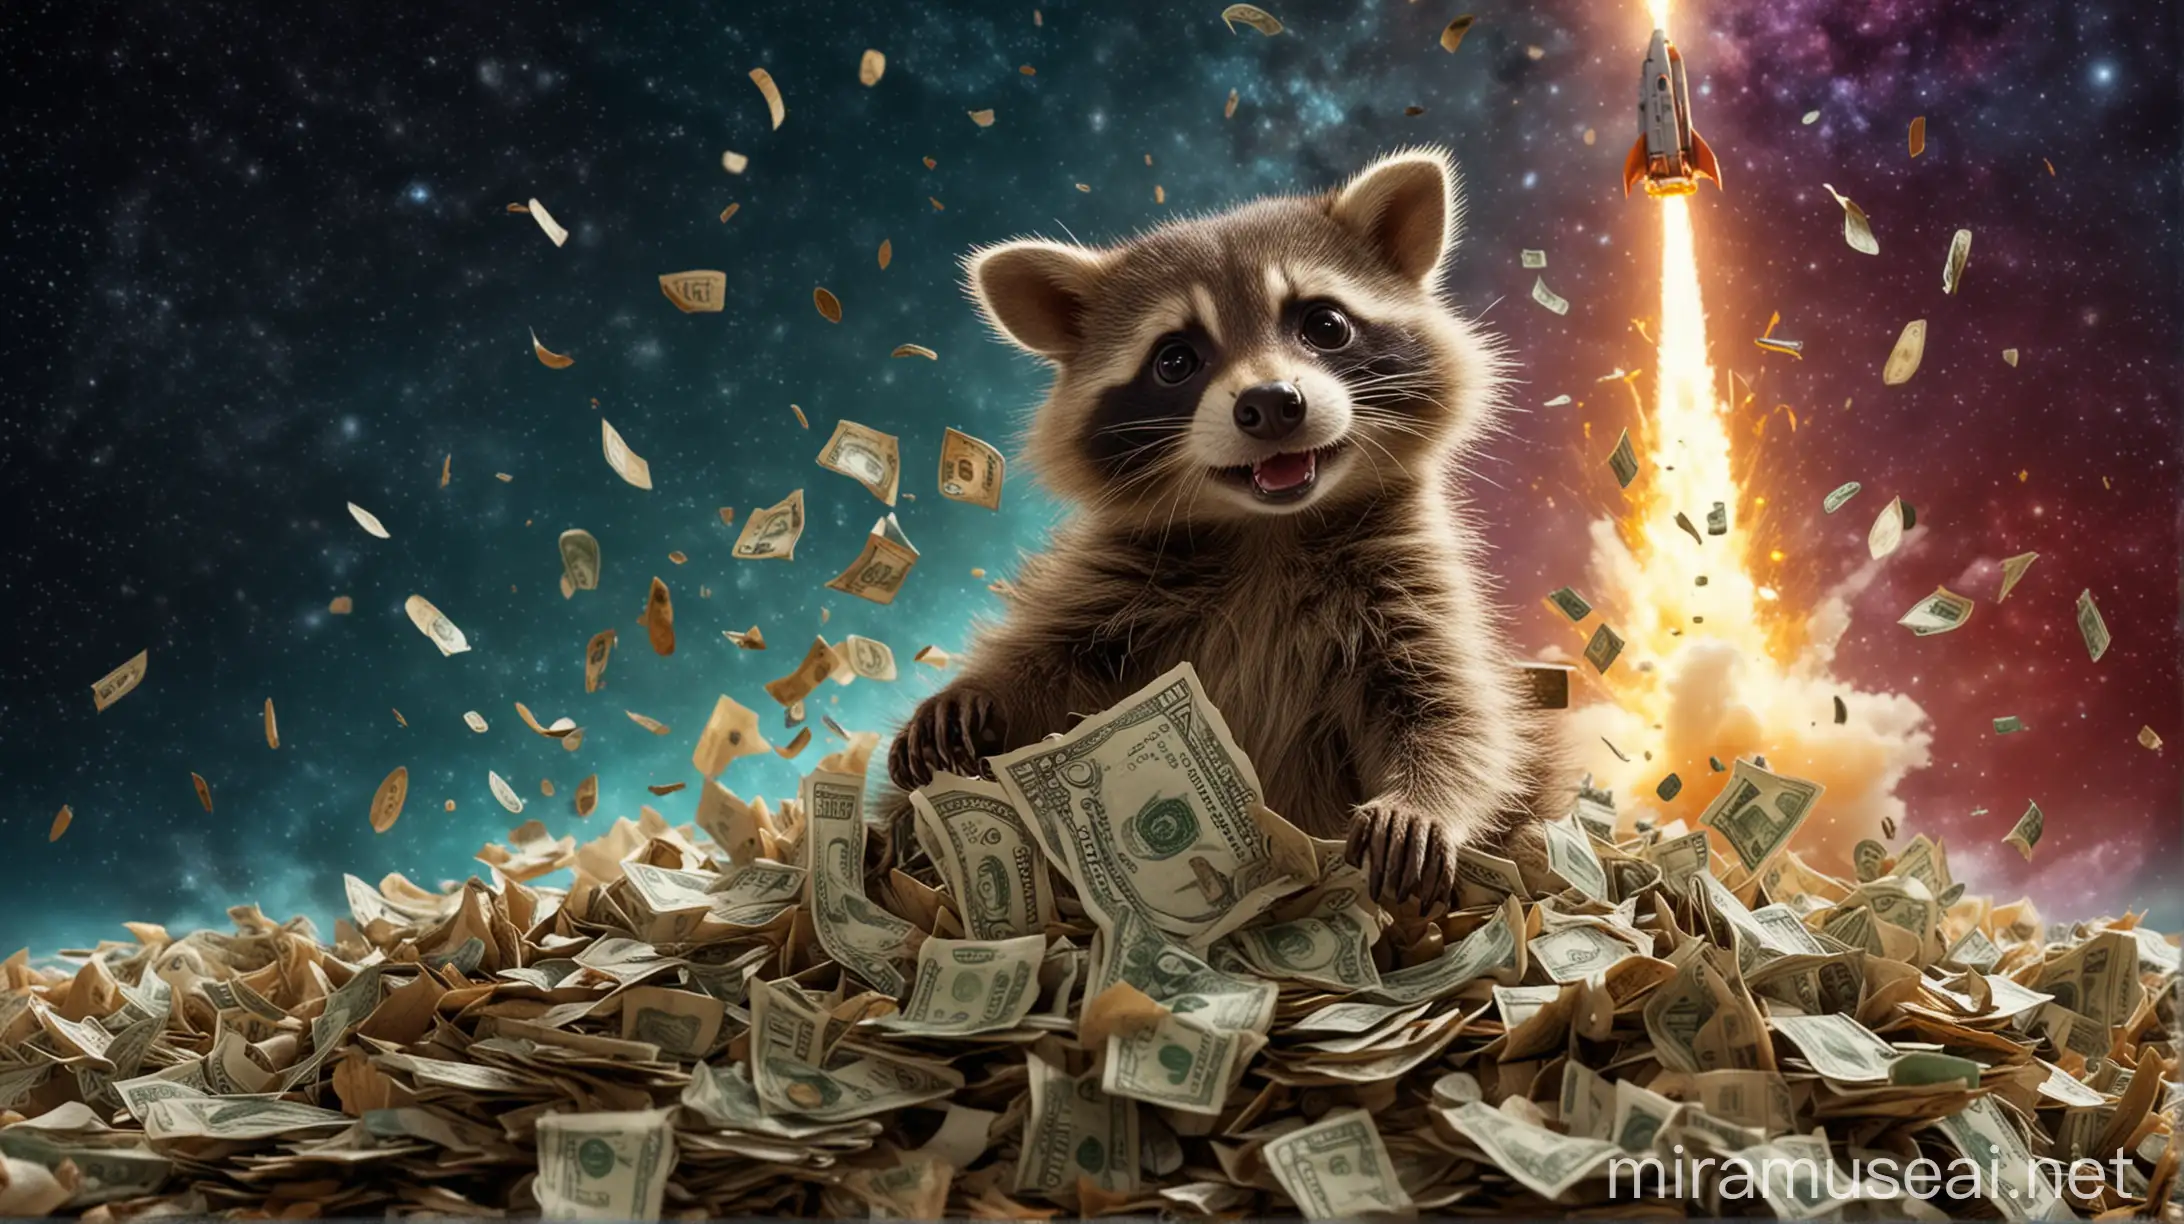 Hyperrealistic Cinematic Image of Baby Raccoon Pedro Riding MoneyFueled Rocket Through Vibrant Space